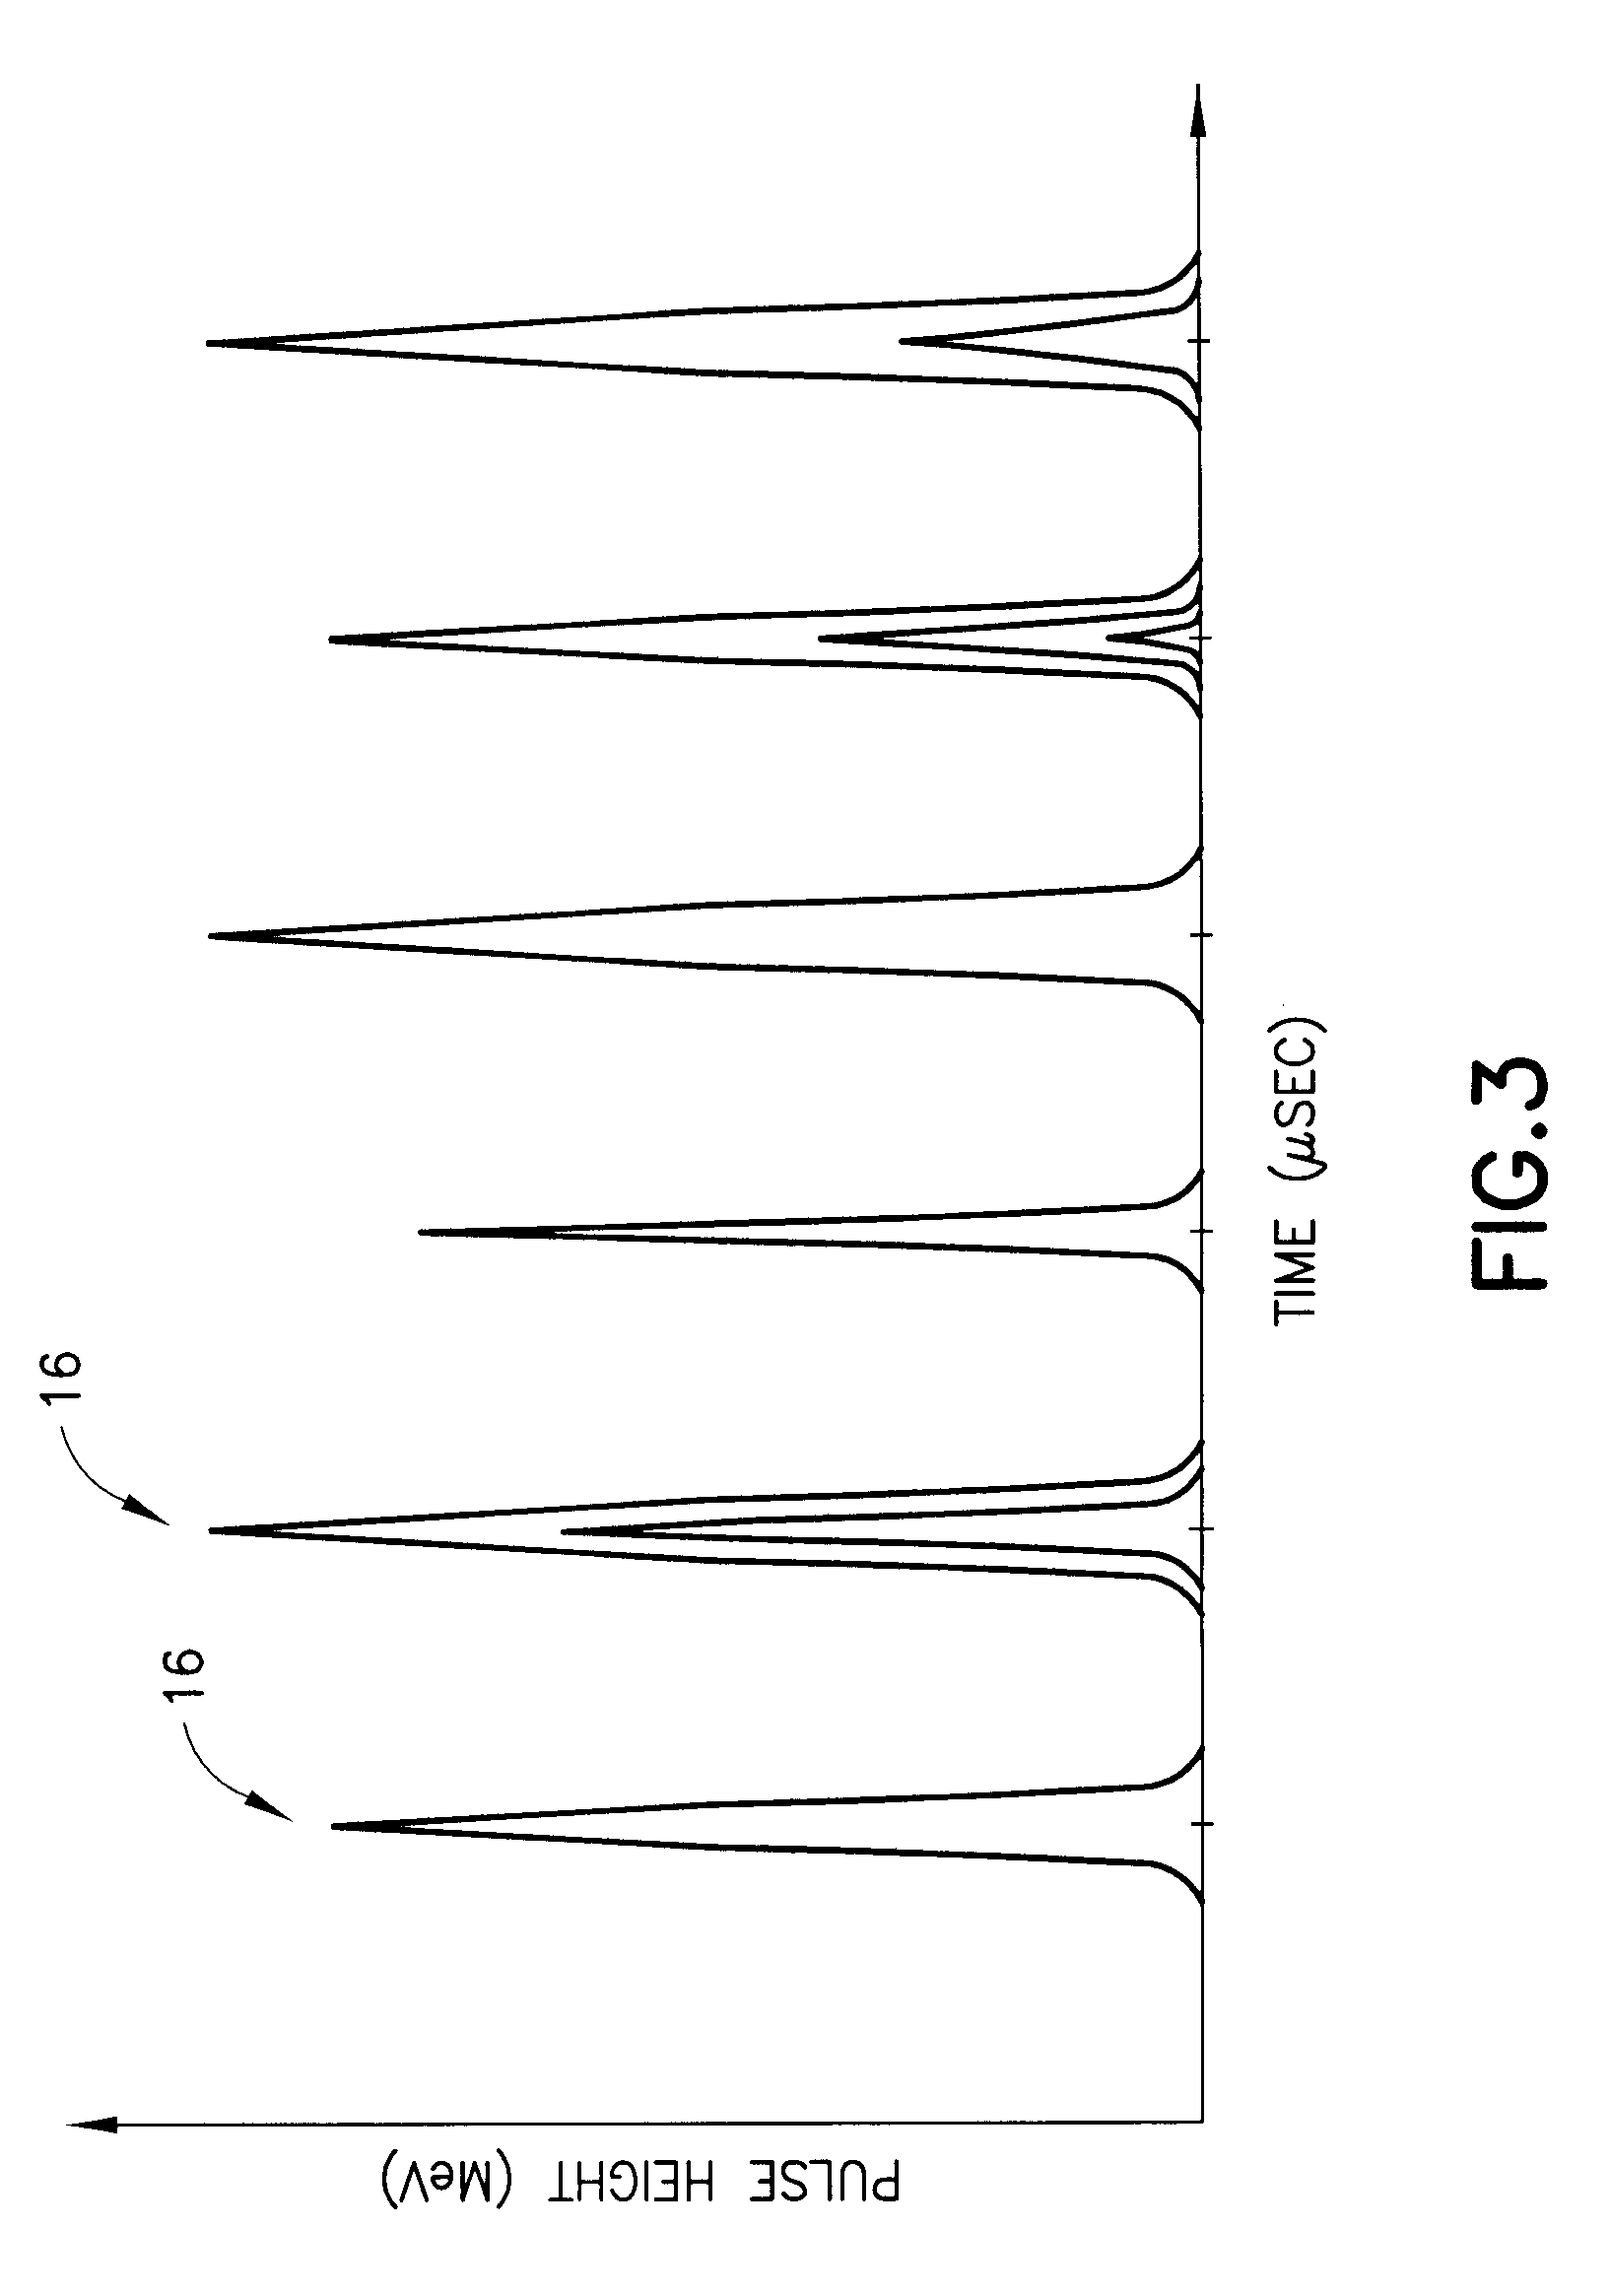 Method of extracting formation density and pe using a pulsed accelerator based litho-density tool